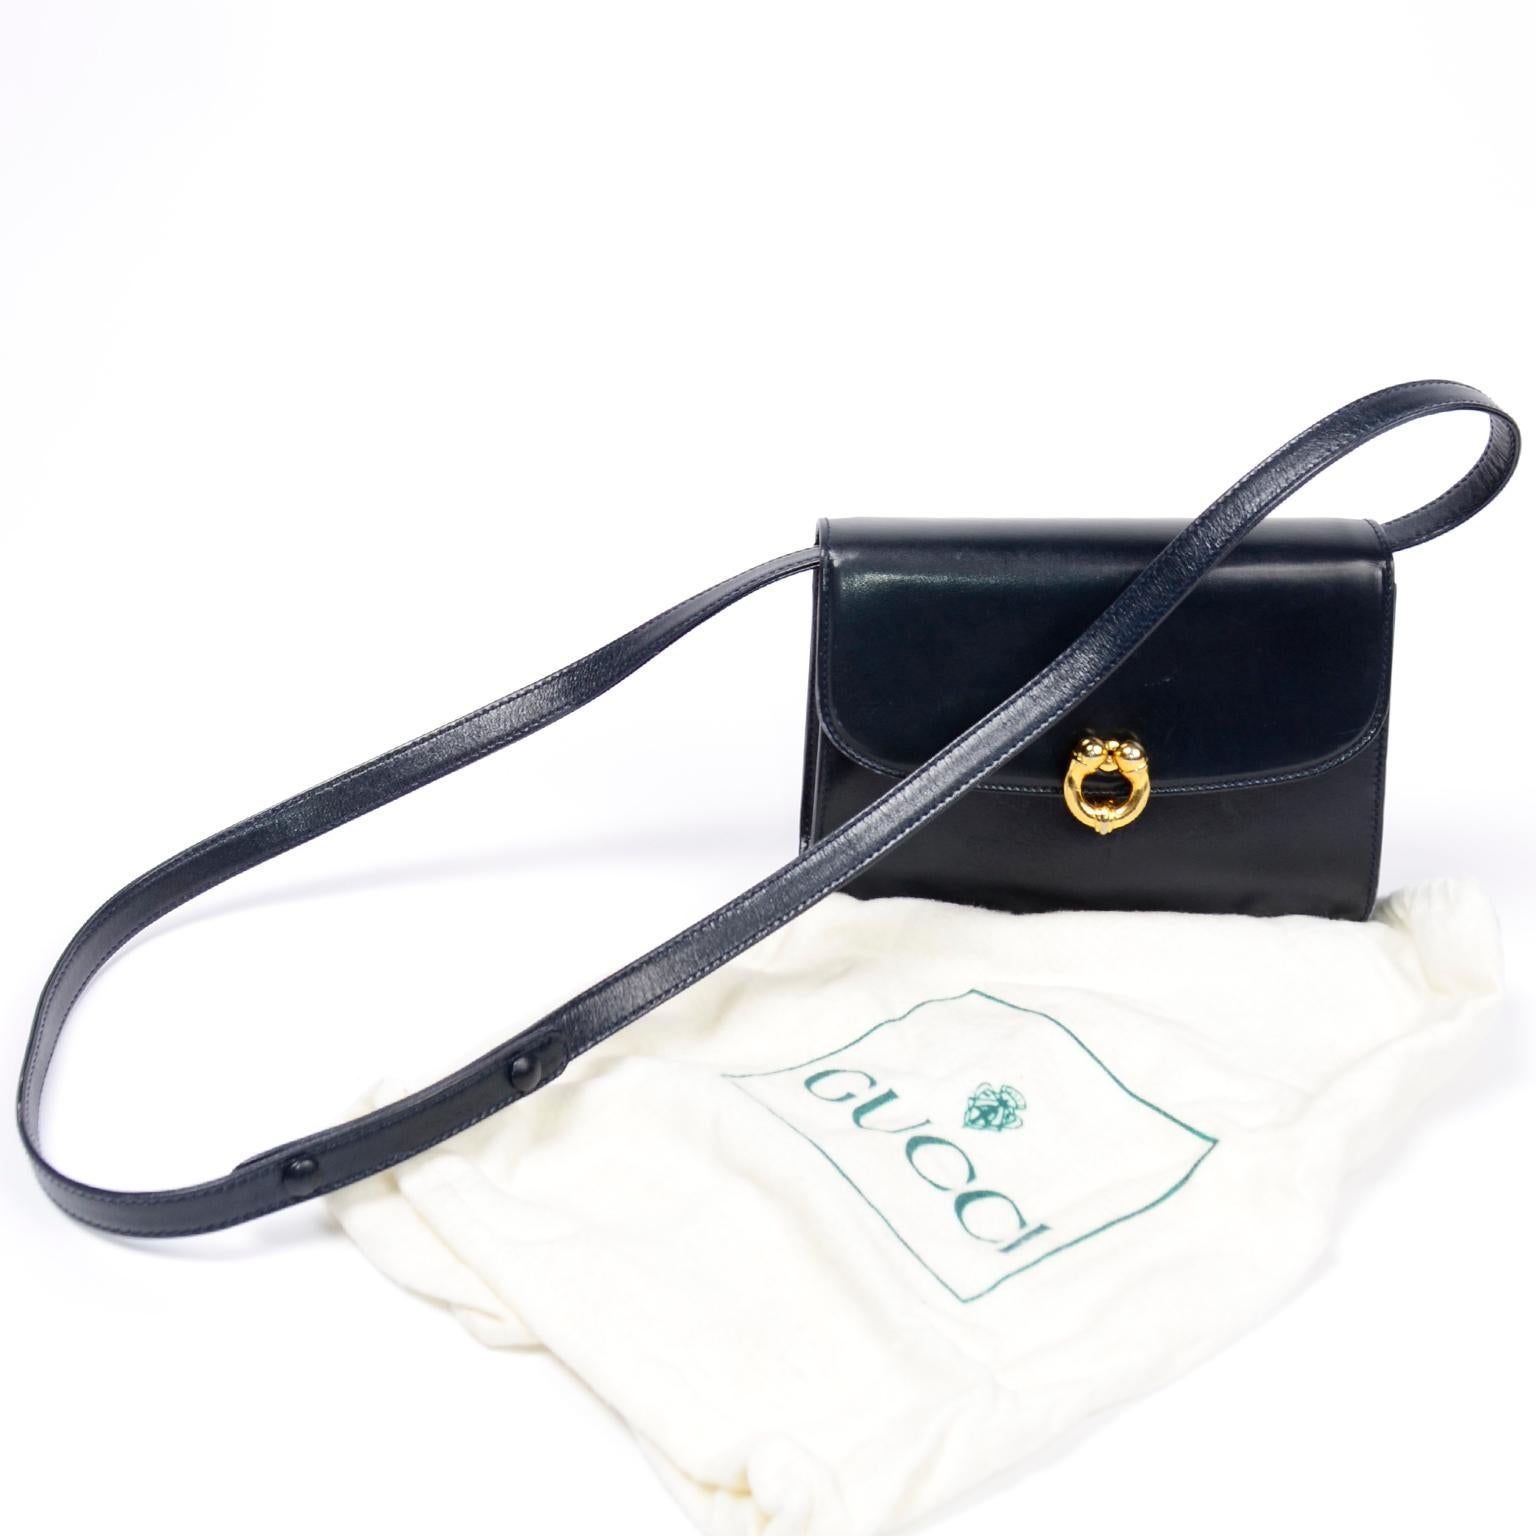 This is a classic Gucci vintage deep navy blue midnight leather handbag with a long shoulder strap and gold hardware.  This timeless bag can be worn as a shoulder bag or cross body. We love the gold ball clasp and the Gucci signature vintage red